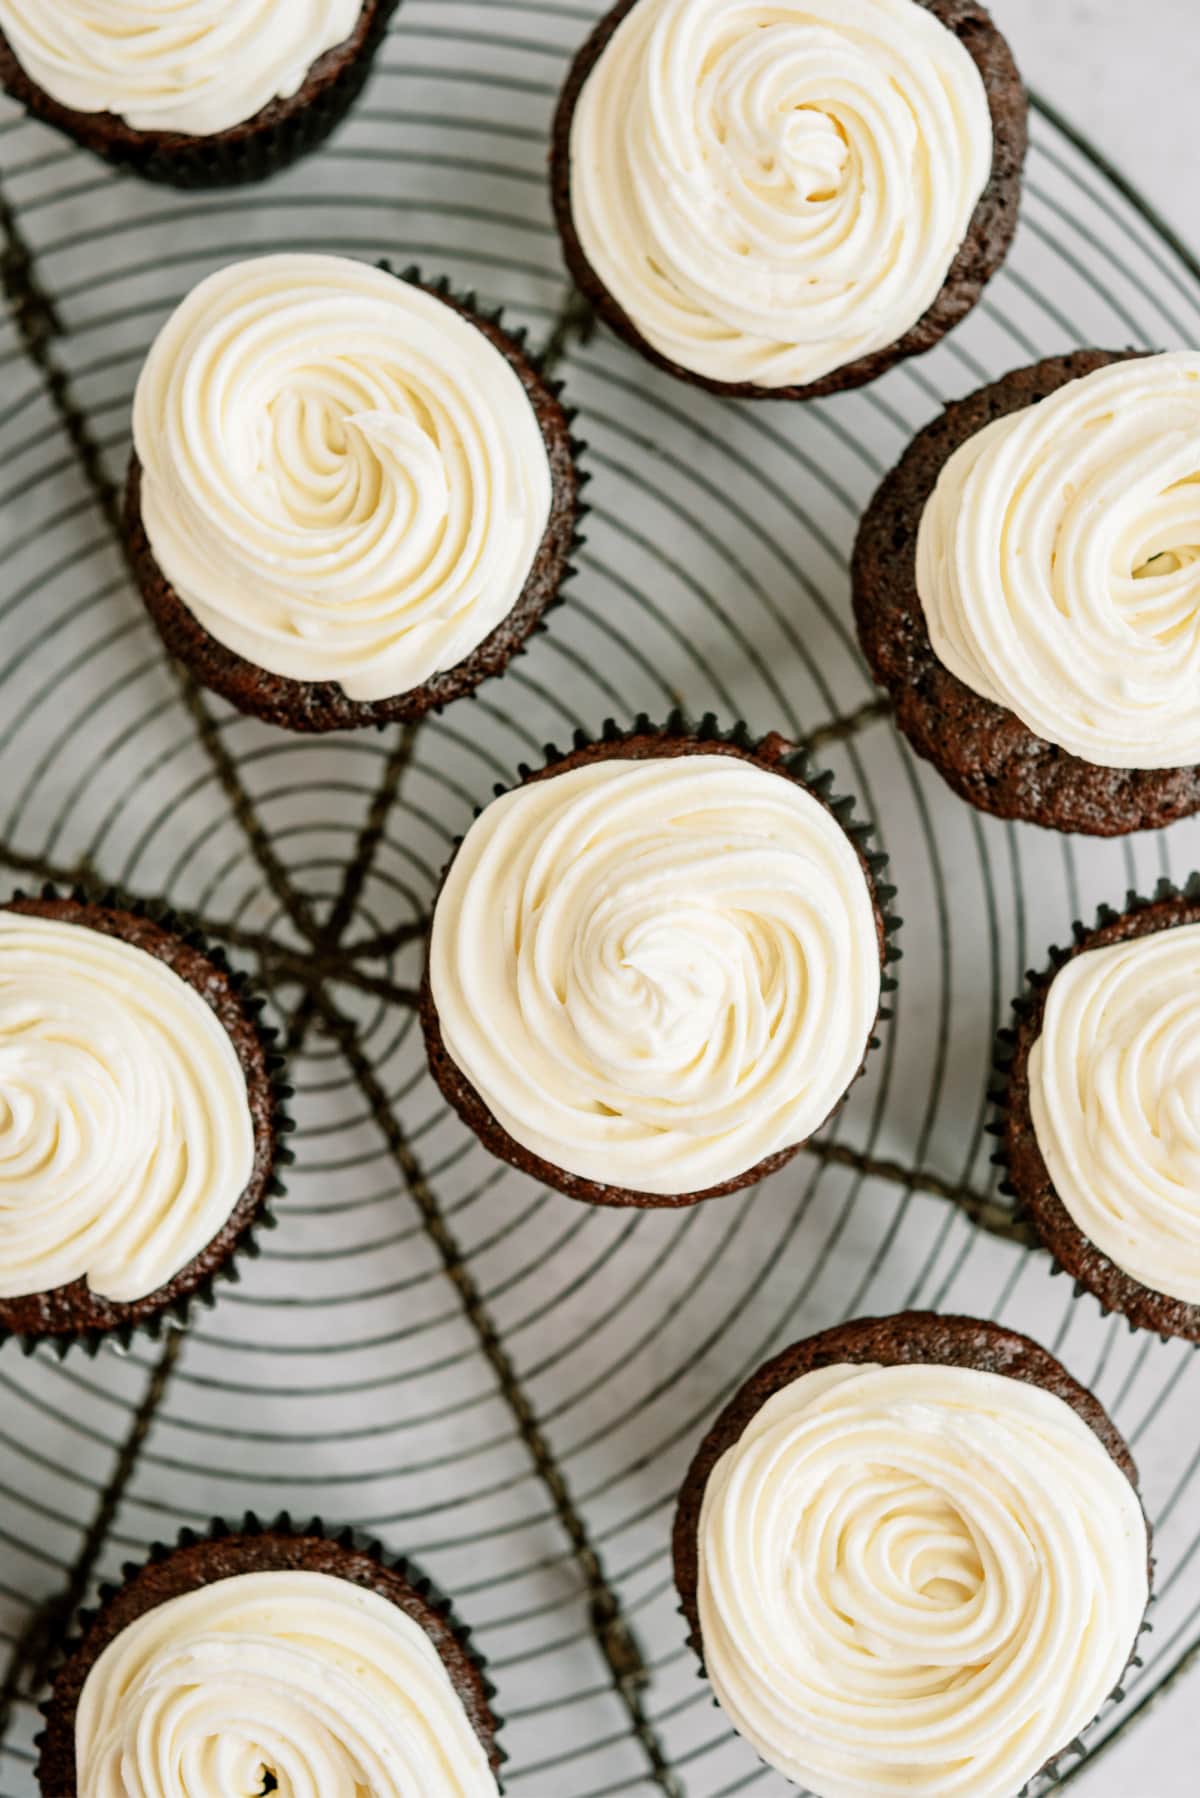 chocolate-cupcakes-with-vanilla-frosting on round wire rack